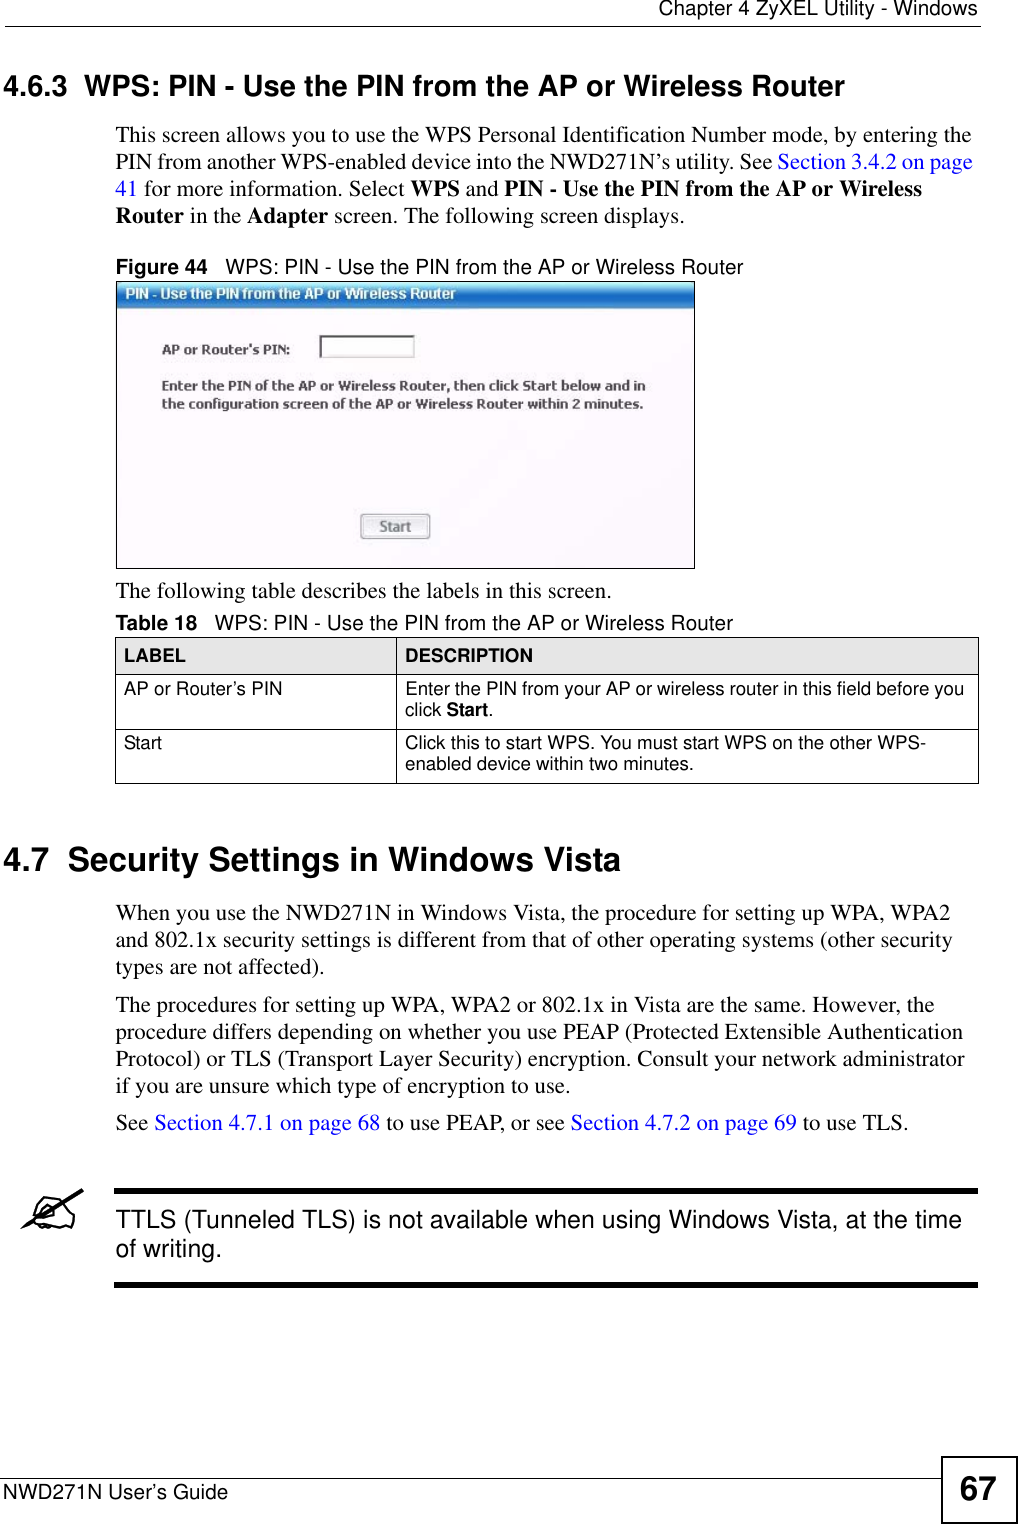  Chapter 4 ZyXEL Utility - WindowsNWD271N User’s Guide 674.6.3  WPS: PIN - Use the PIN from the AP or Wireless RouterThis screen allows you to use the WPS Personal Identification Number mode, by entering the PIN from another WPS-enabled device into the NWD271N’s utility. See Section 3.4.2 on page 41 for more information. Select WPS and PIN - Use the PIN from the AP or Wireless Router in the Adapter screen. The following screen displays.Figure 44   WPS: PIN - Use the PIN from the AP or Wireless RouterThe following table describes the labels in this screen. 4.7  Security Settings in Windows Vista When you use the NWD271N in Windows Vista, the procedure for setting up WPA, WPA2 and 802.1x security settings is different from that of other operating systems (other security types are not affected).The procedures for setting up WPA, WPA2 or 802.1x in Vista are the same. However, the procedure differs depending on whether you use PEAP (Protected Extensible Authentication Protocol) or TLS (Transport Layer Security) encryption. Consult your network administrator if you are unsure which type of encryption to use. See Section 4.7.1 on page 68 to use PEAP, or see Section 4.7.2 on page 69 to use TLS.&quot;TTLS (Tunneled TLS) is not available when using Windows Vista, at the time of writing.Table 18   WPS: PIN - Use the PIN from the AP or Wireless RouterLABEL DESCRIPTIONAP or Router’s PIN Enter the PIN from your AP or wireless router in this field before you click Start.Start Click this to start WPS. You must start WPS on the other WPS-enabled device within two minutes.